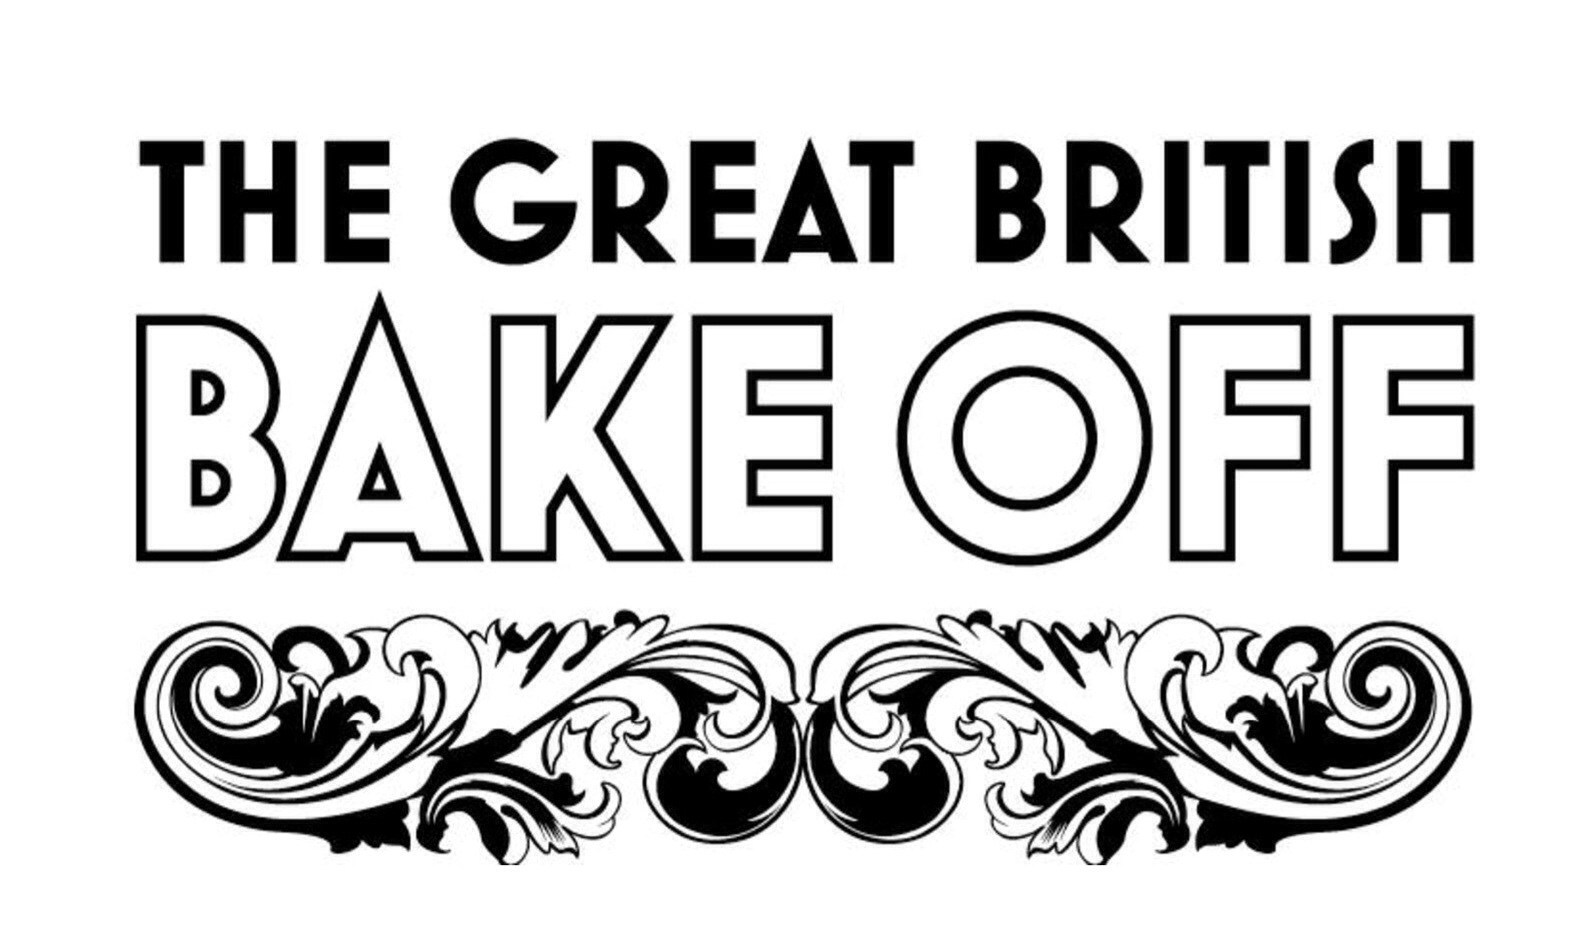 The Great British Bake Off re